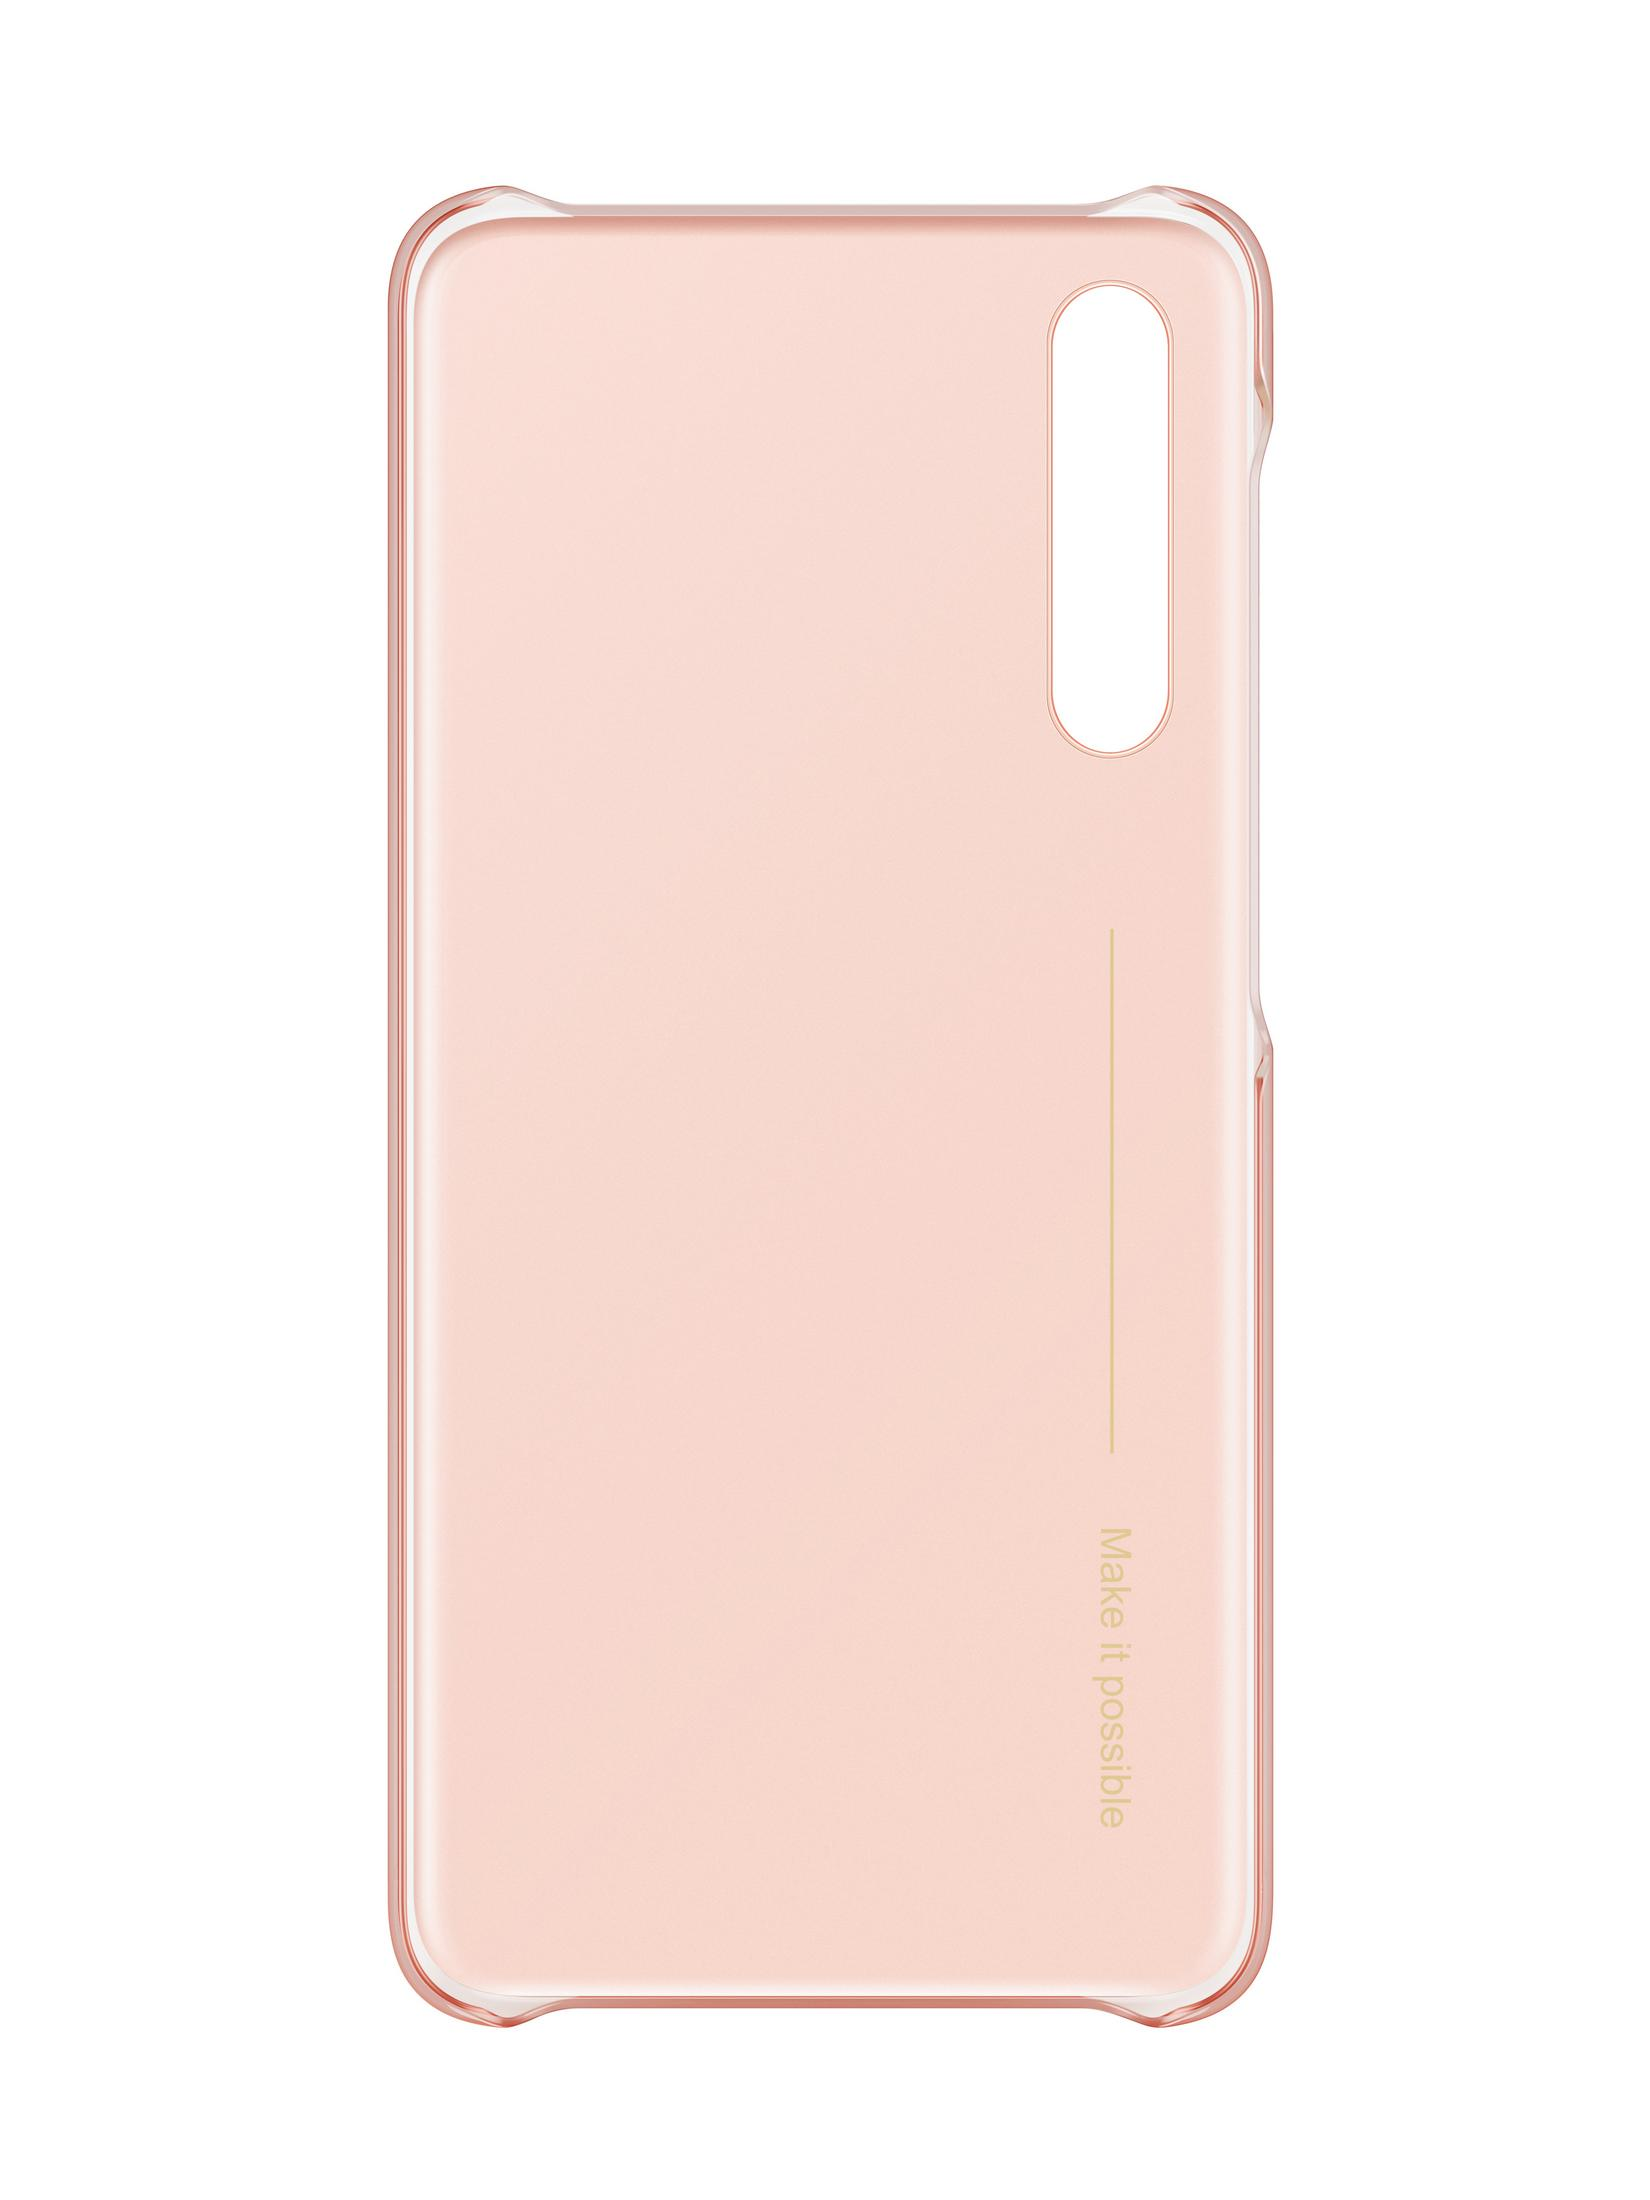 Pink Backcover, P20 51992376 COLOR Pro, Huawei, P20 HUAWEI CASE PINK, PRO